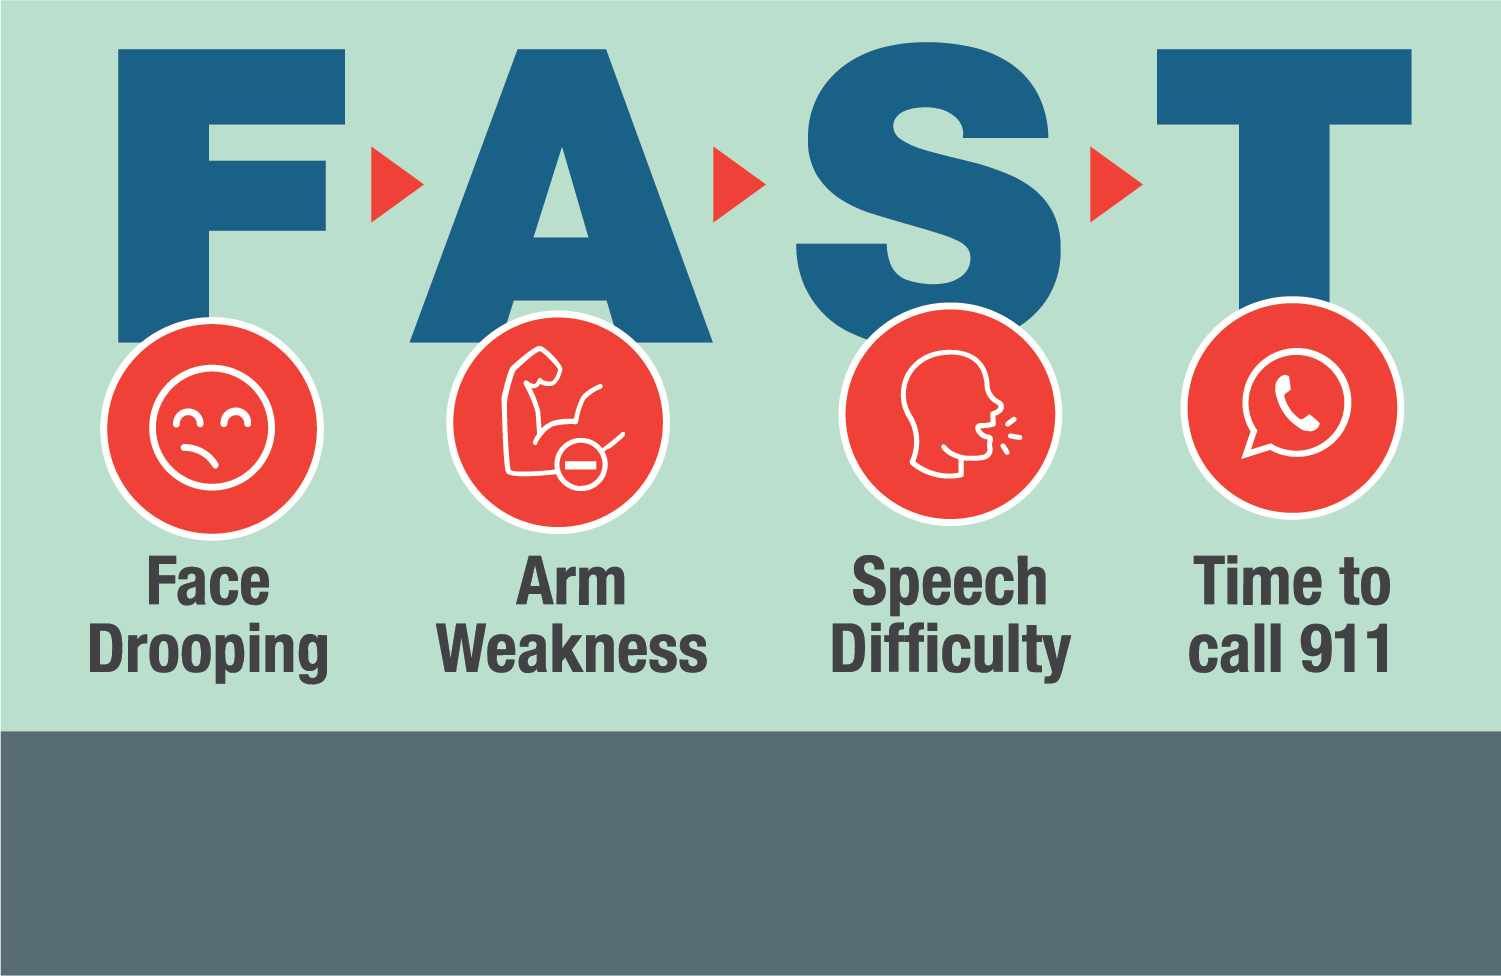 FAST is an acronym used to help people